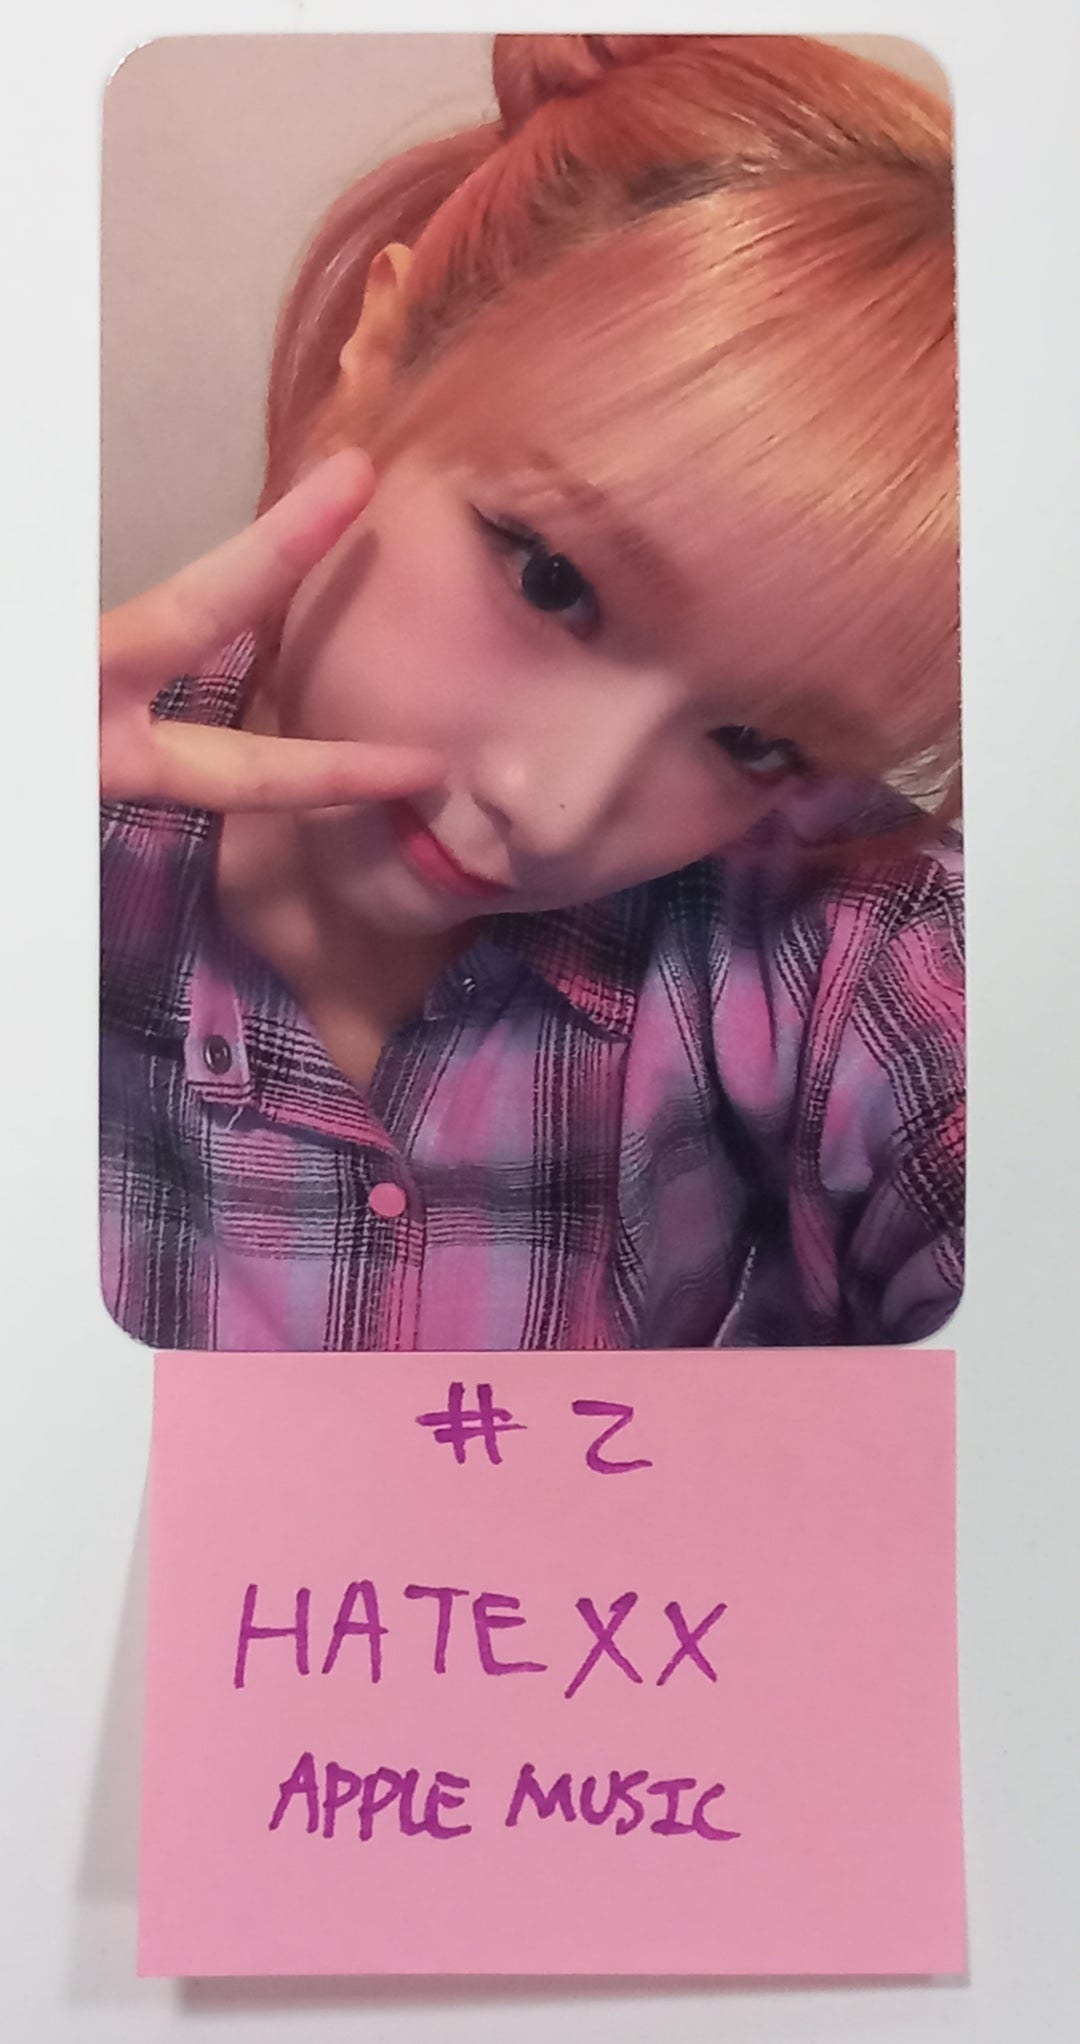 Yena "HATE XX" - Apple Music Fansign Event Photocard Round 4 [23.10.10]